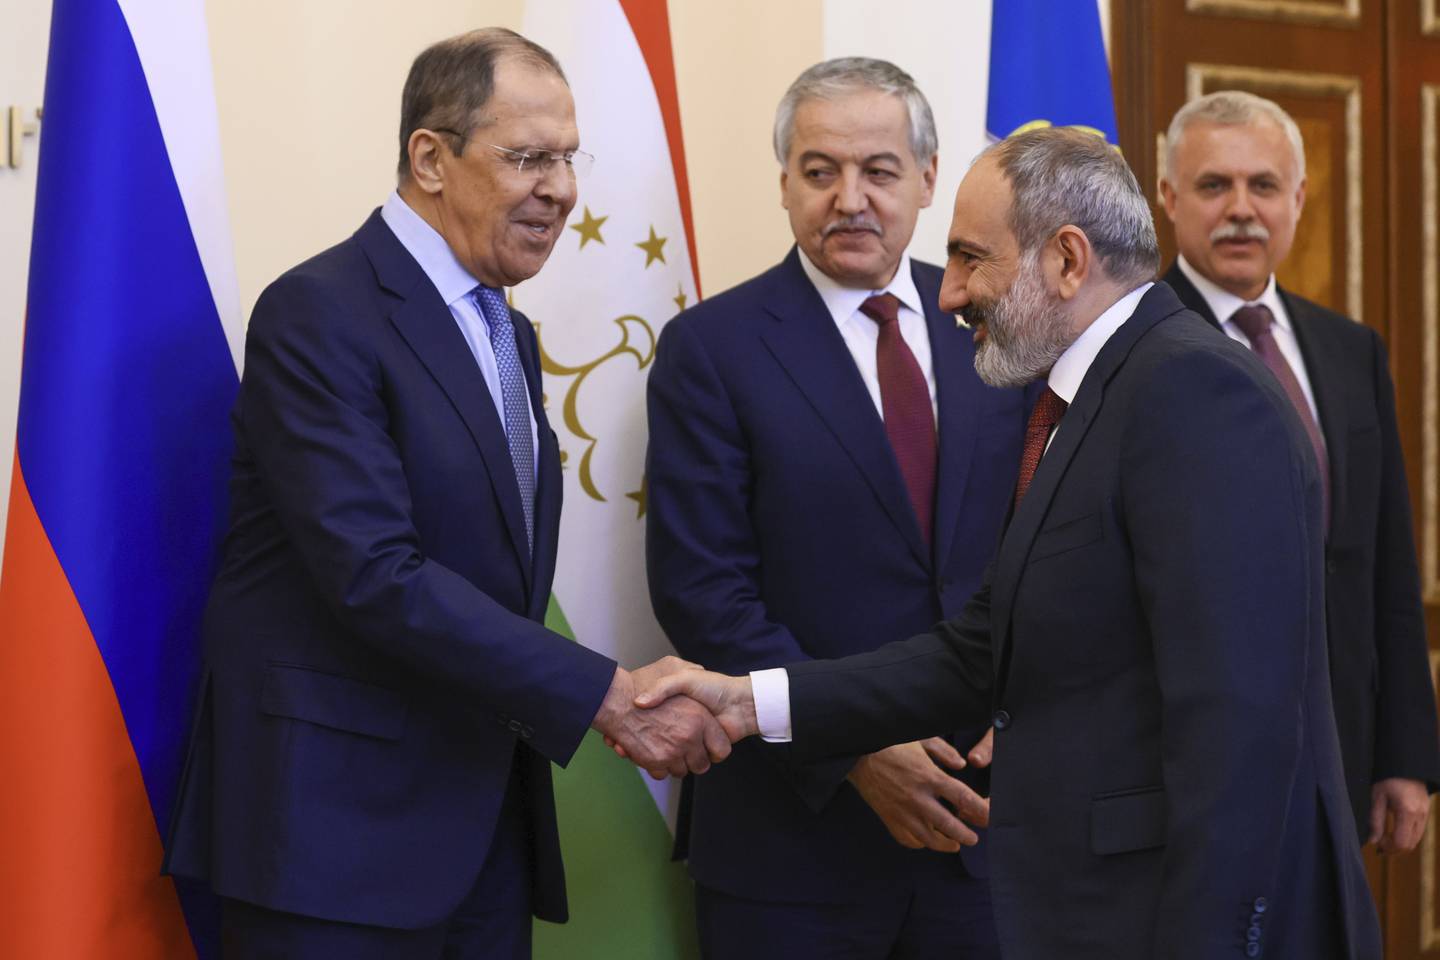 Russian Foreign Minister Sergei Lavrov, left, and Armenia's Prime Minister Nikol Pashinyan shake hands ahead of a meeting of the CSTO in Yerevan, Armenia, on June 10. AP